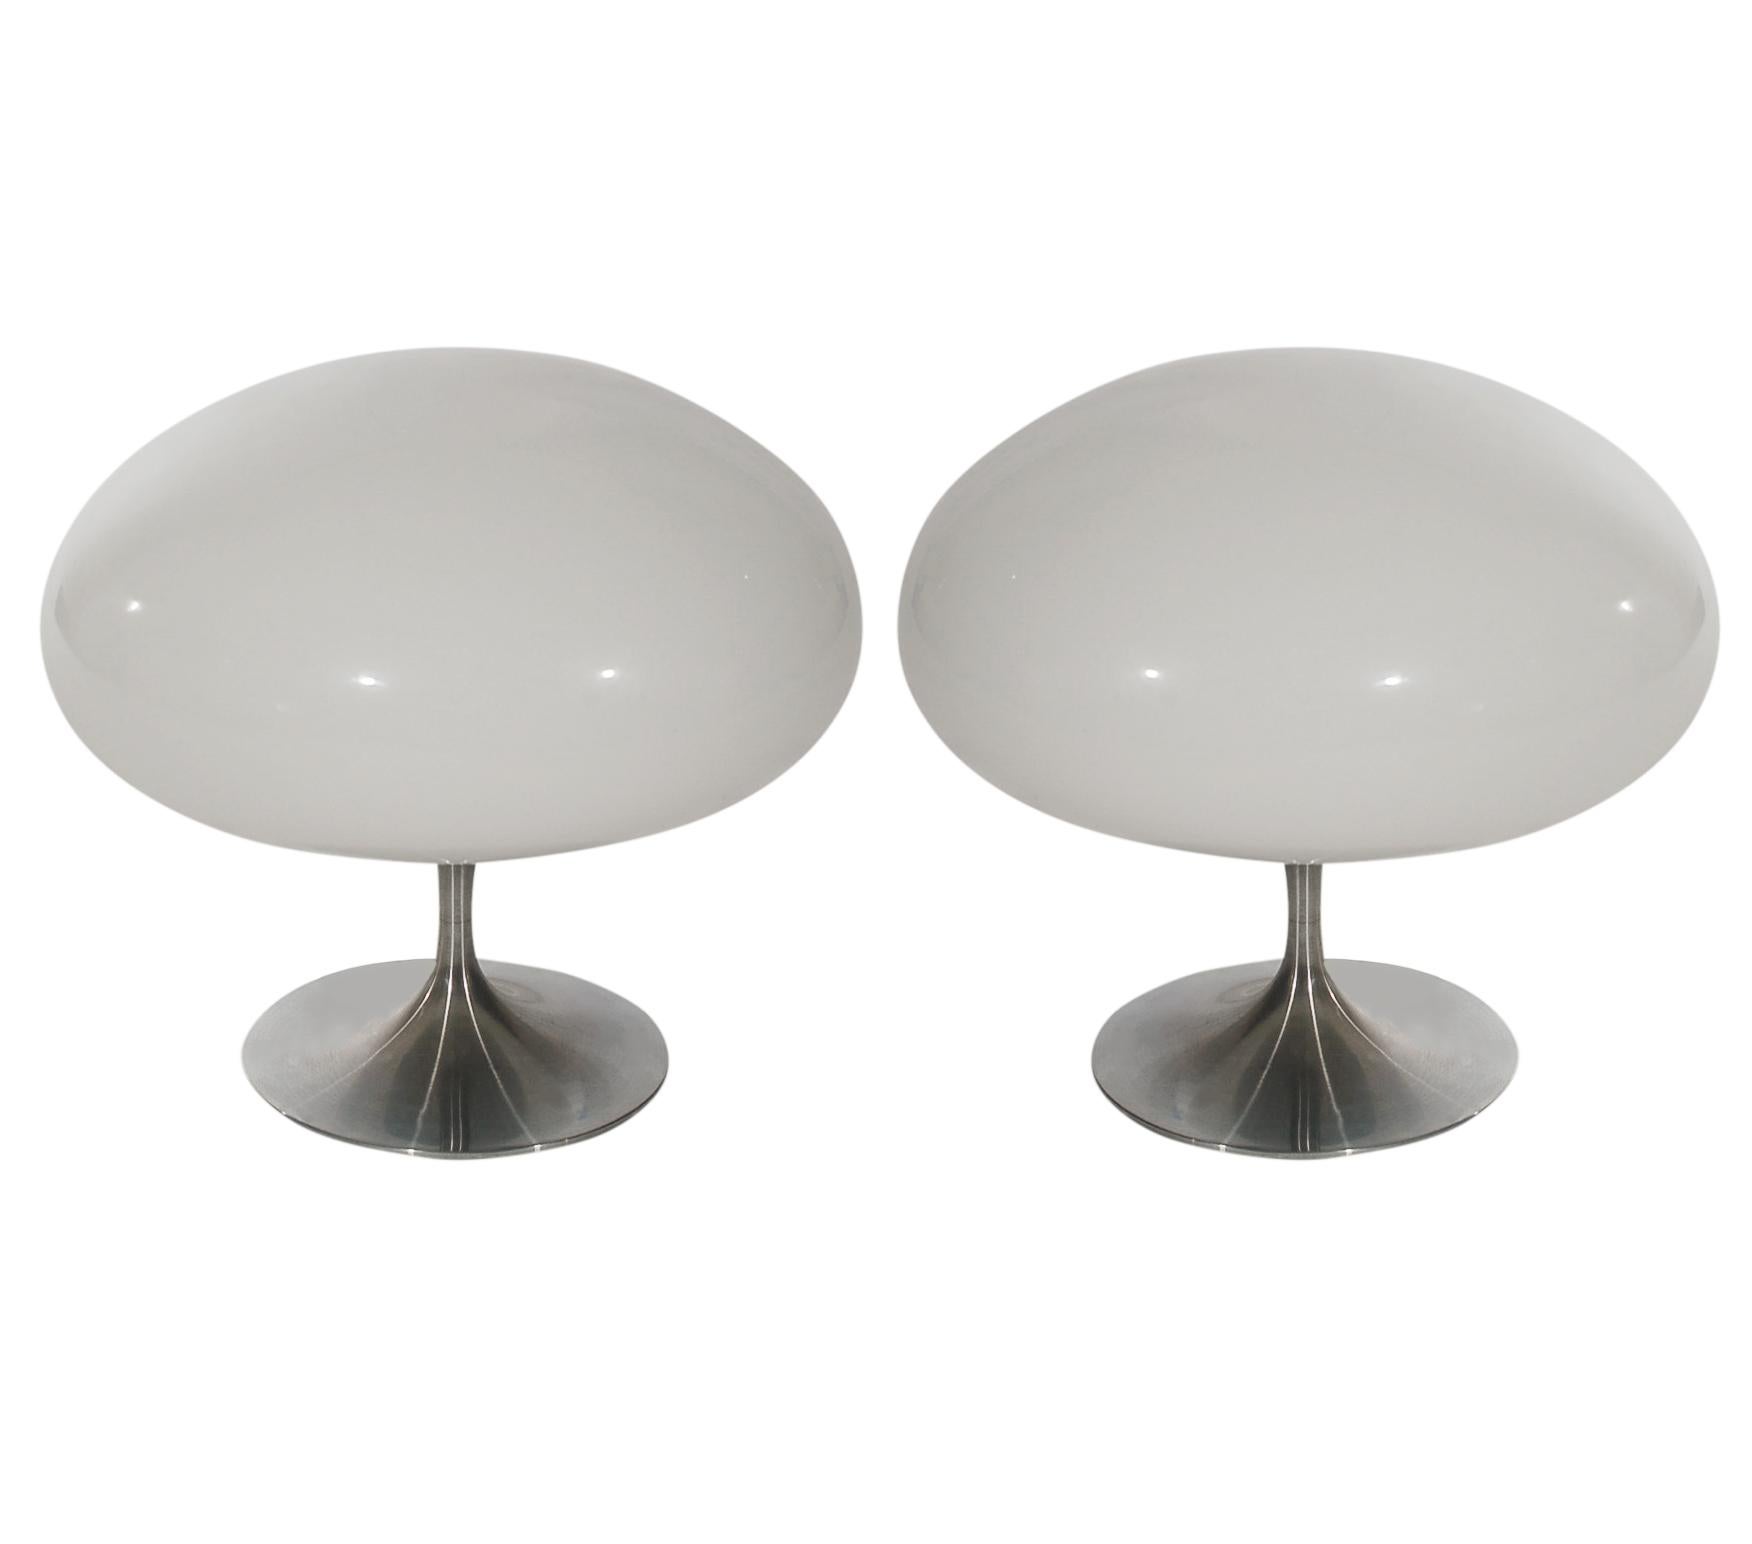 Aluminum Matching Pair of Bill Curry Mid-Century Modern Mushroom Table Lamps for Stemlite